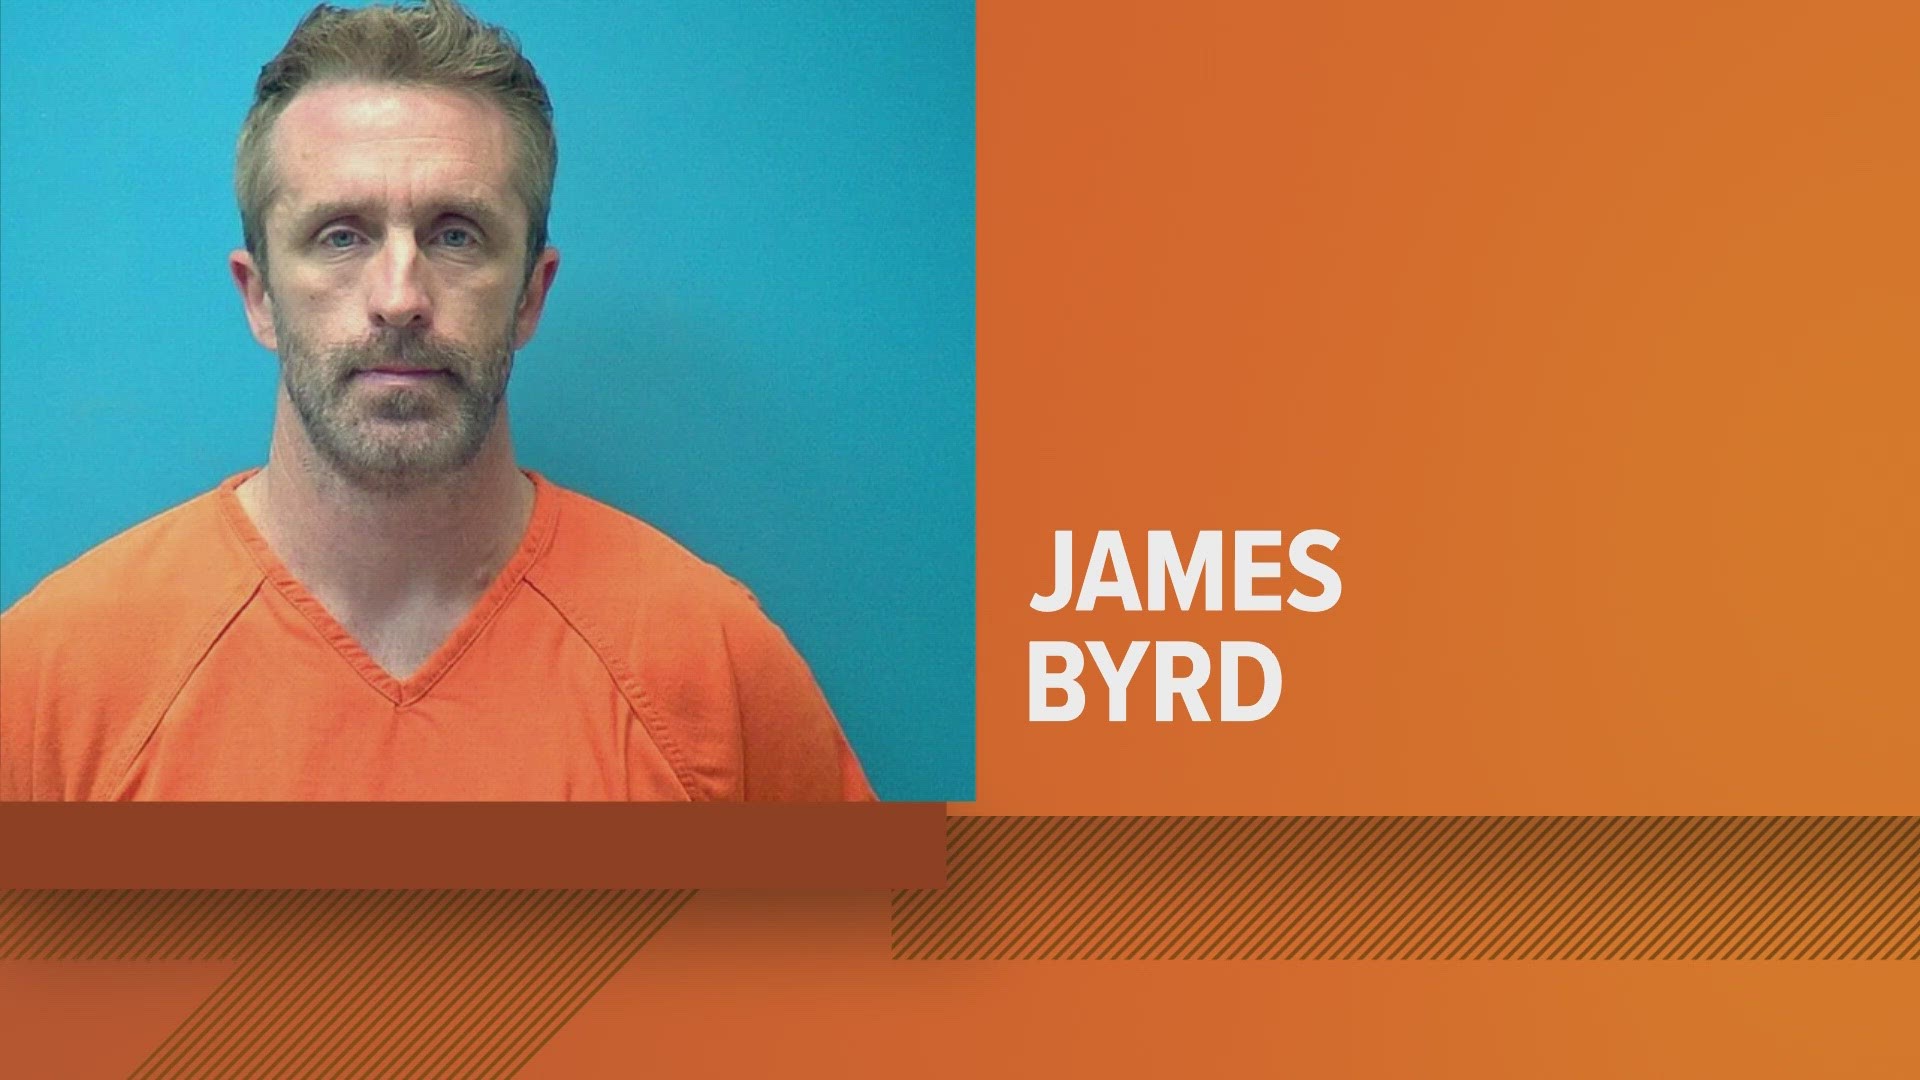 A North Texas police department arrested a Bastrop ISD teacher after they say he was caught trying to message underage girls.